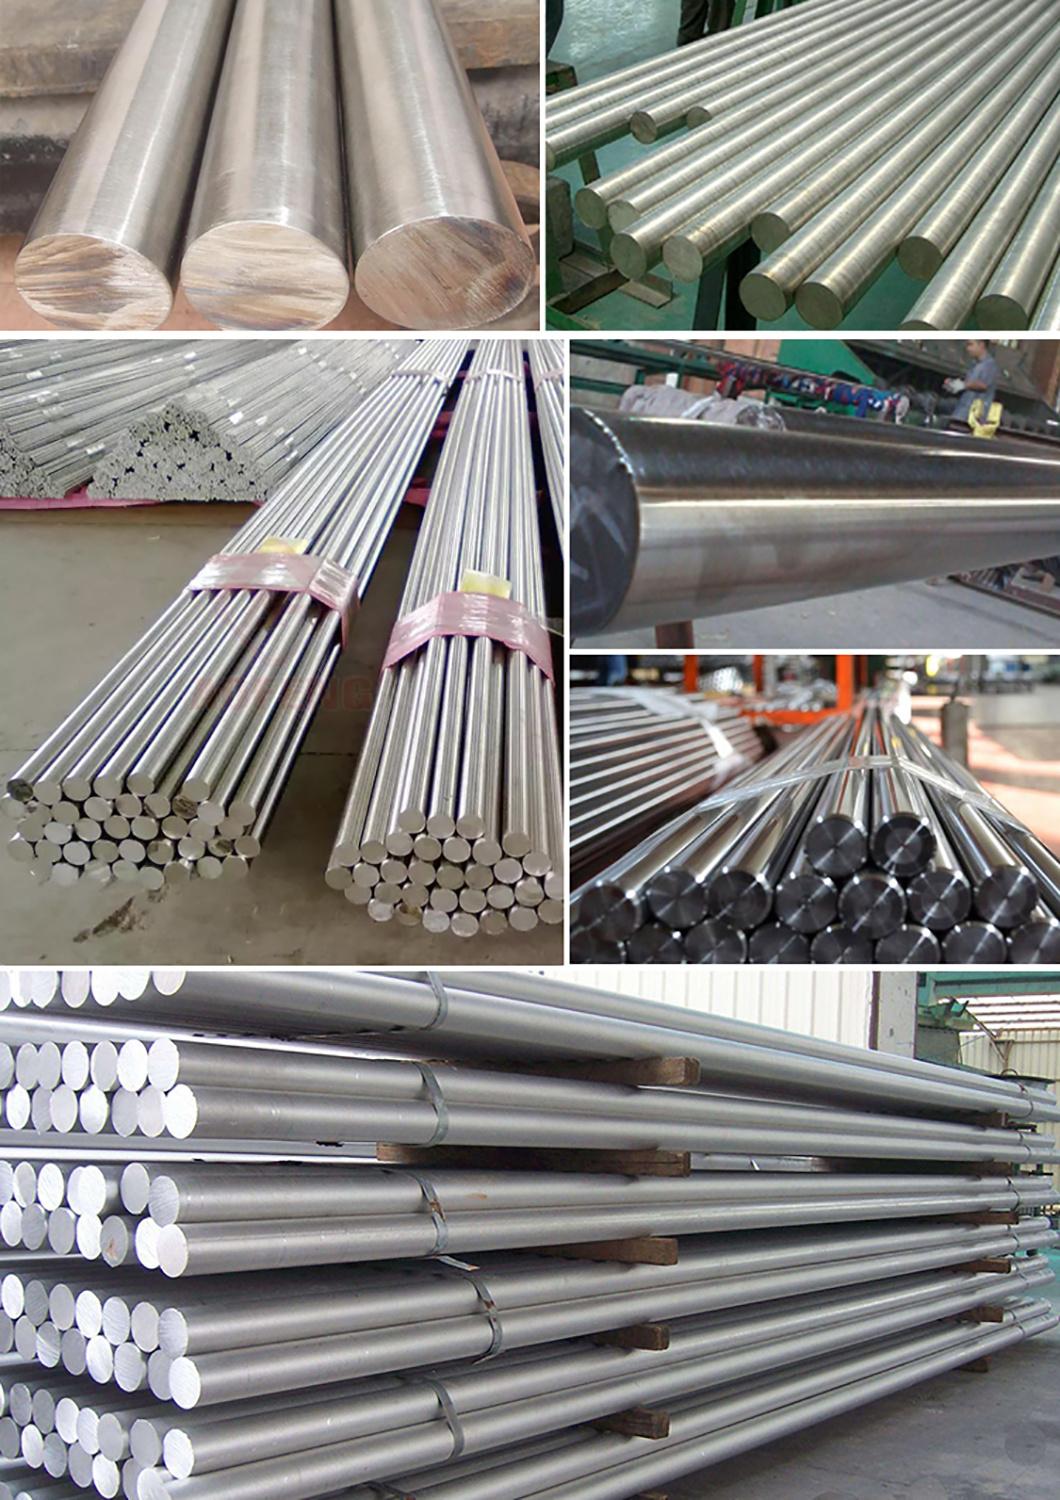 AISI 440c 904L Stainless Steel Bar Duplex Stainless Steel Bar